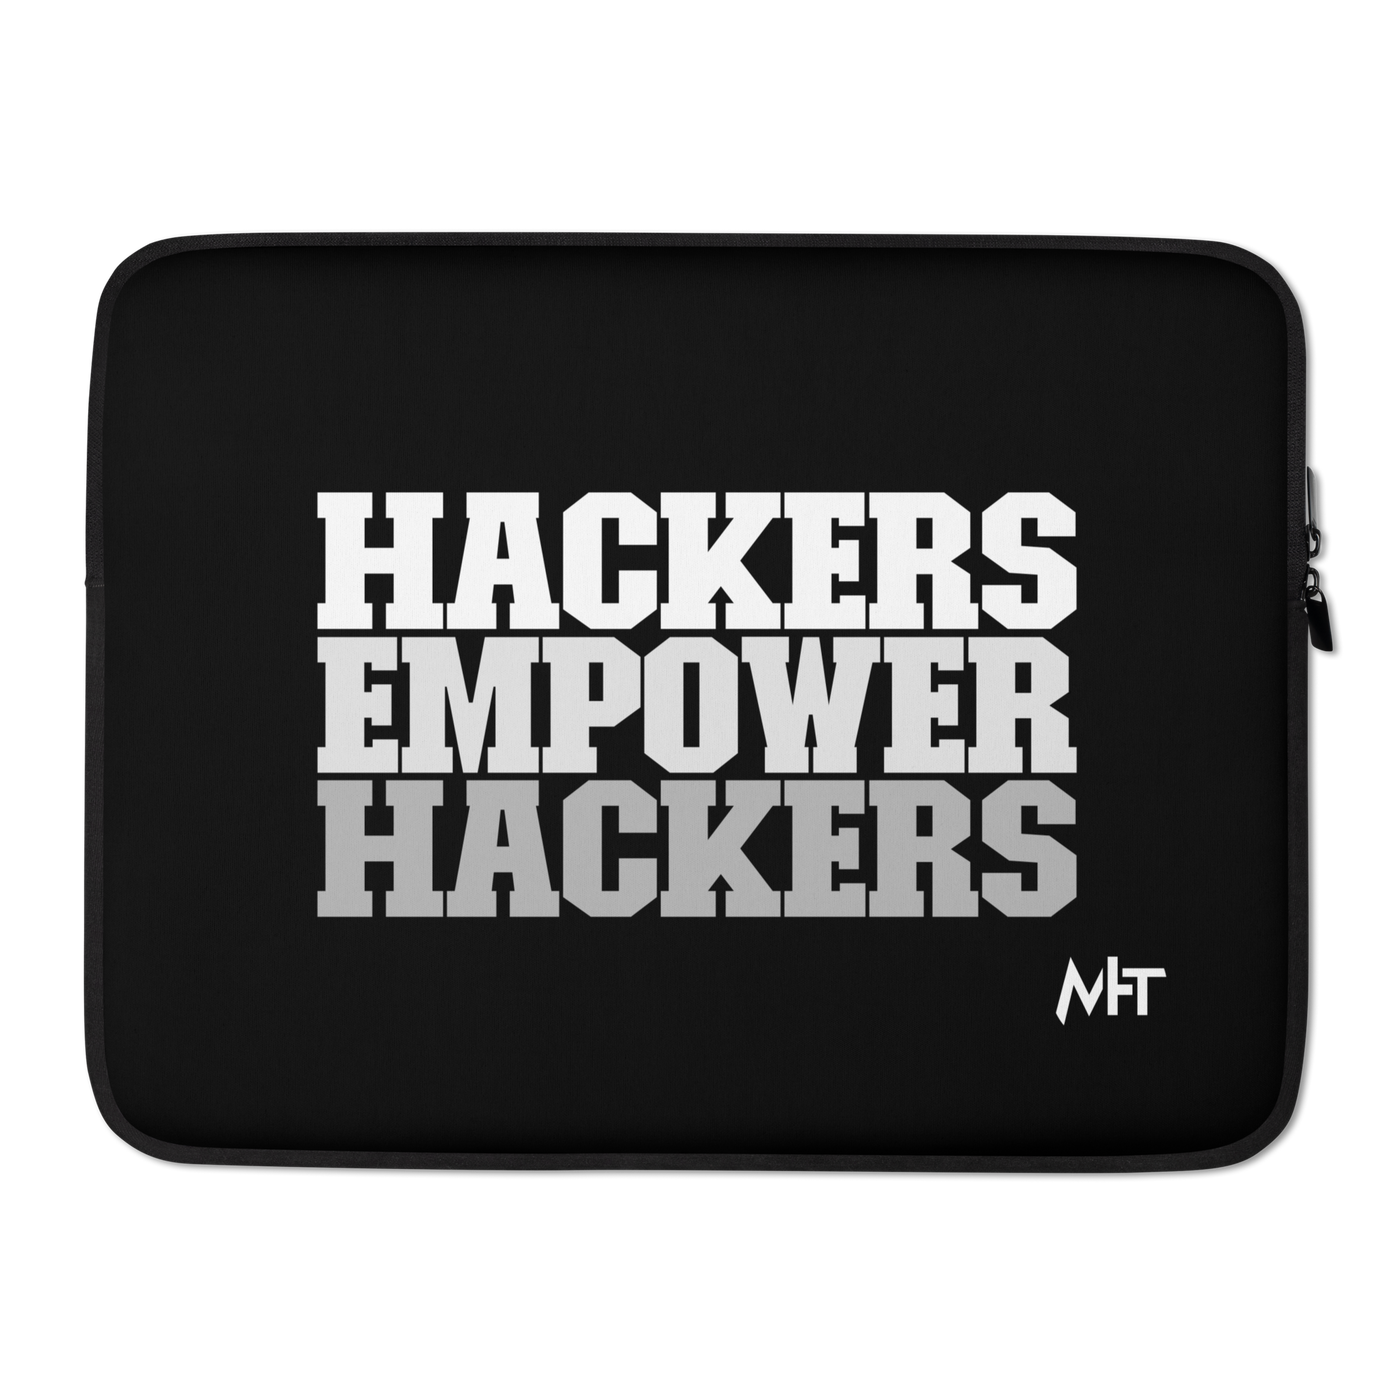 Hackers Empower Hackers V2 - Laptop Sleeve